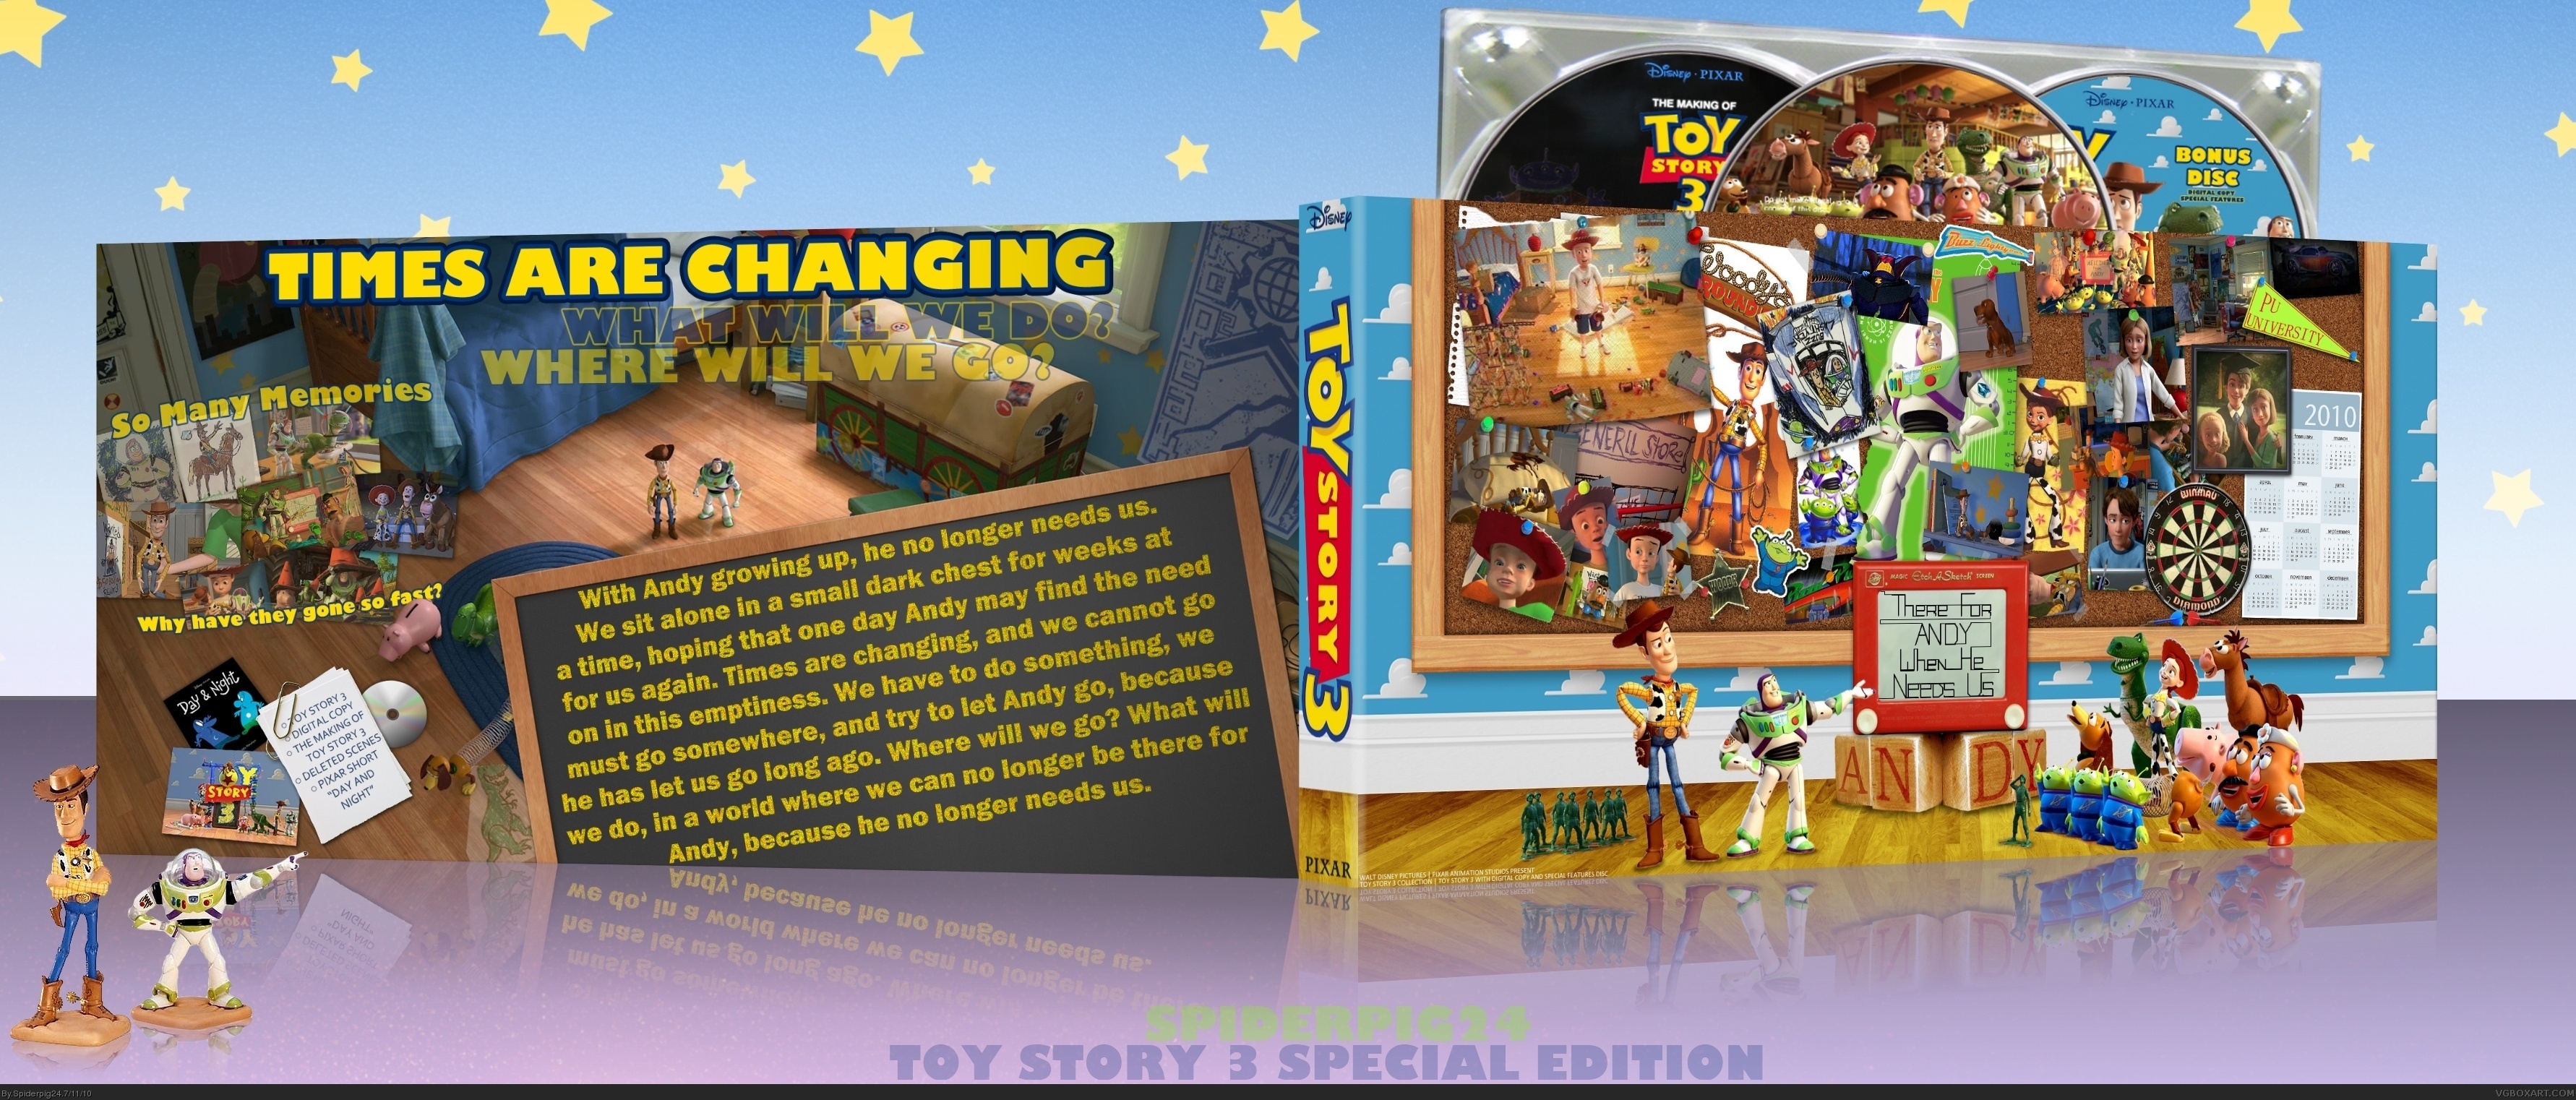 Toy Story 3 Special Edition box cover